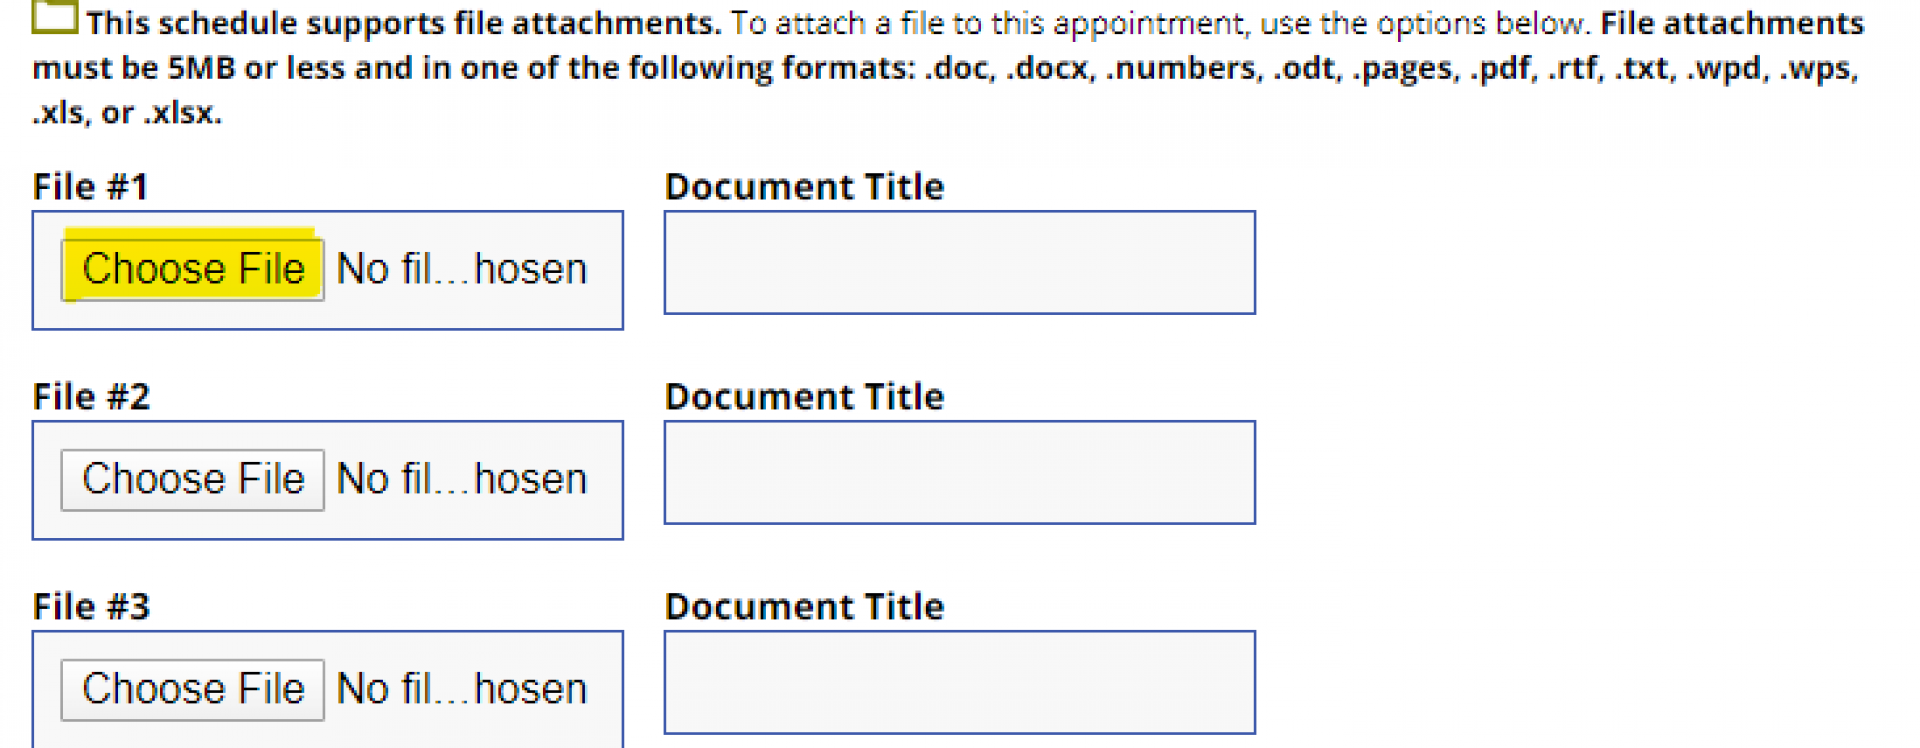 An image of where to upload files in the OWL appointment form.